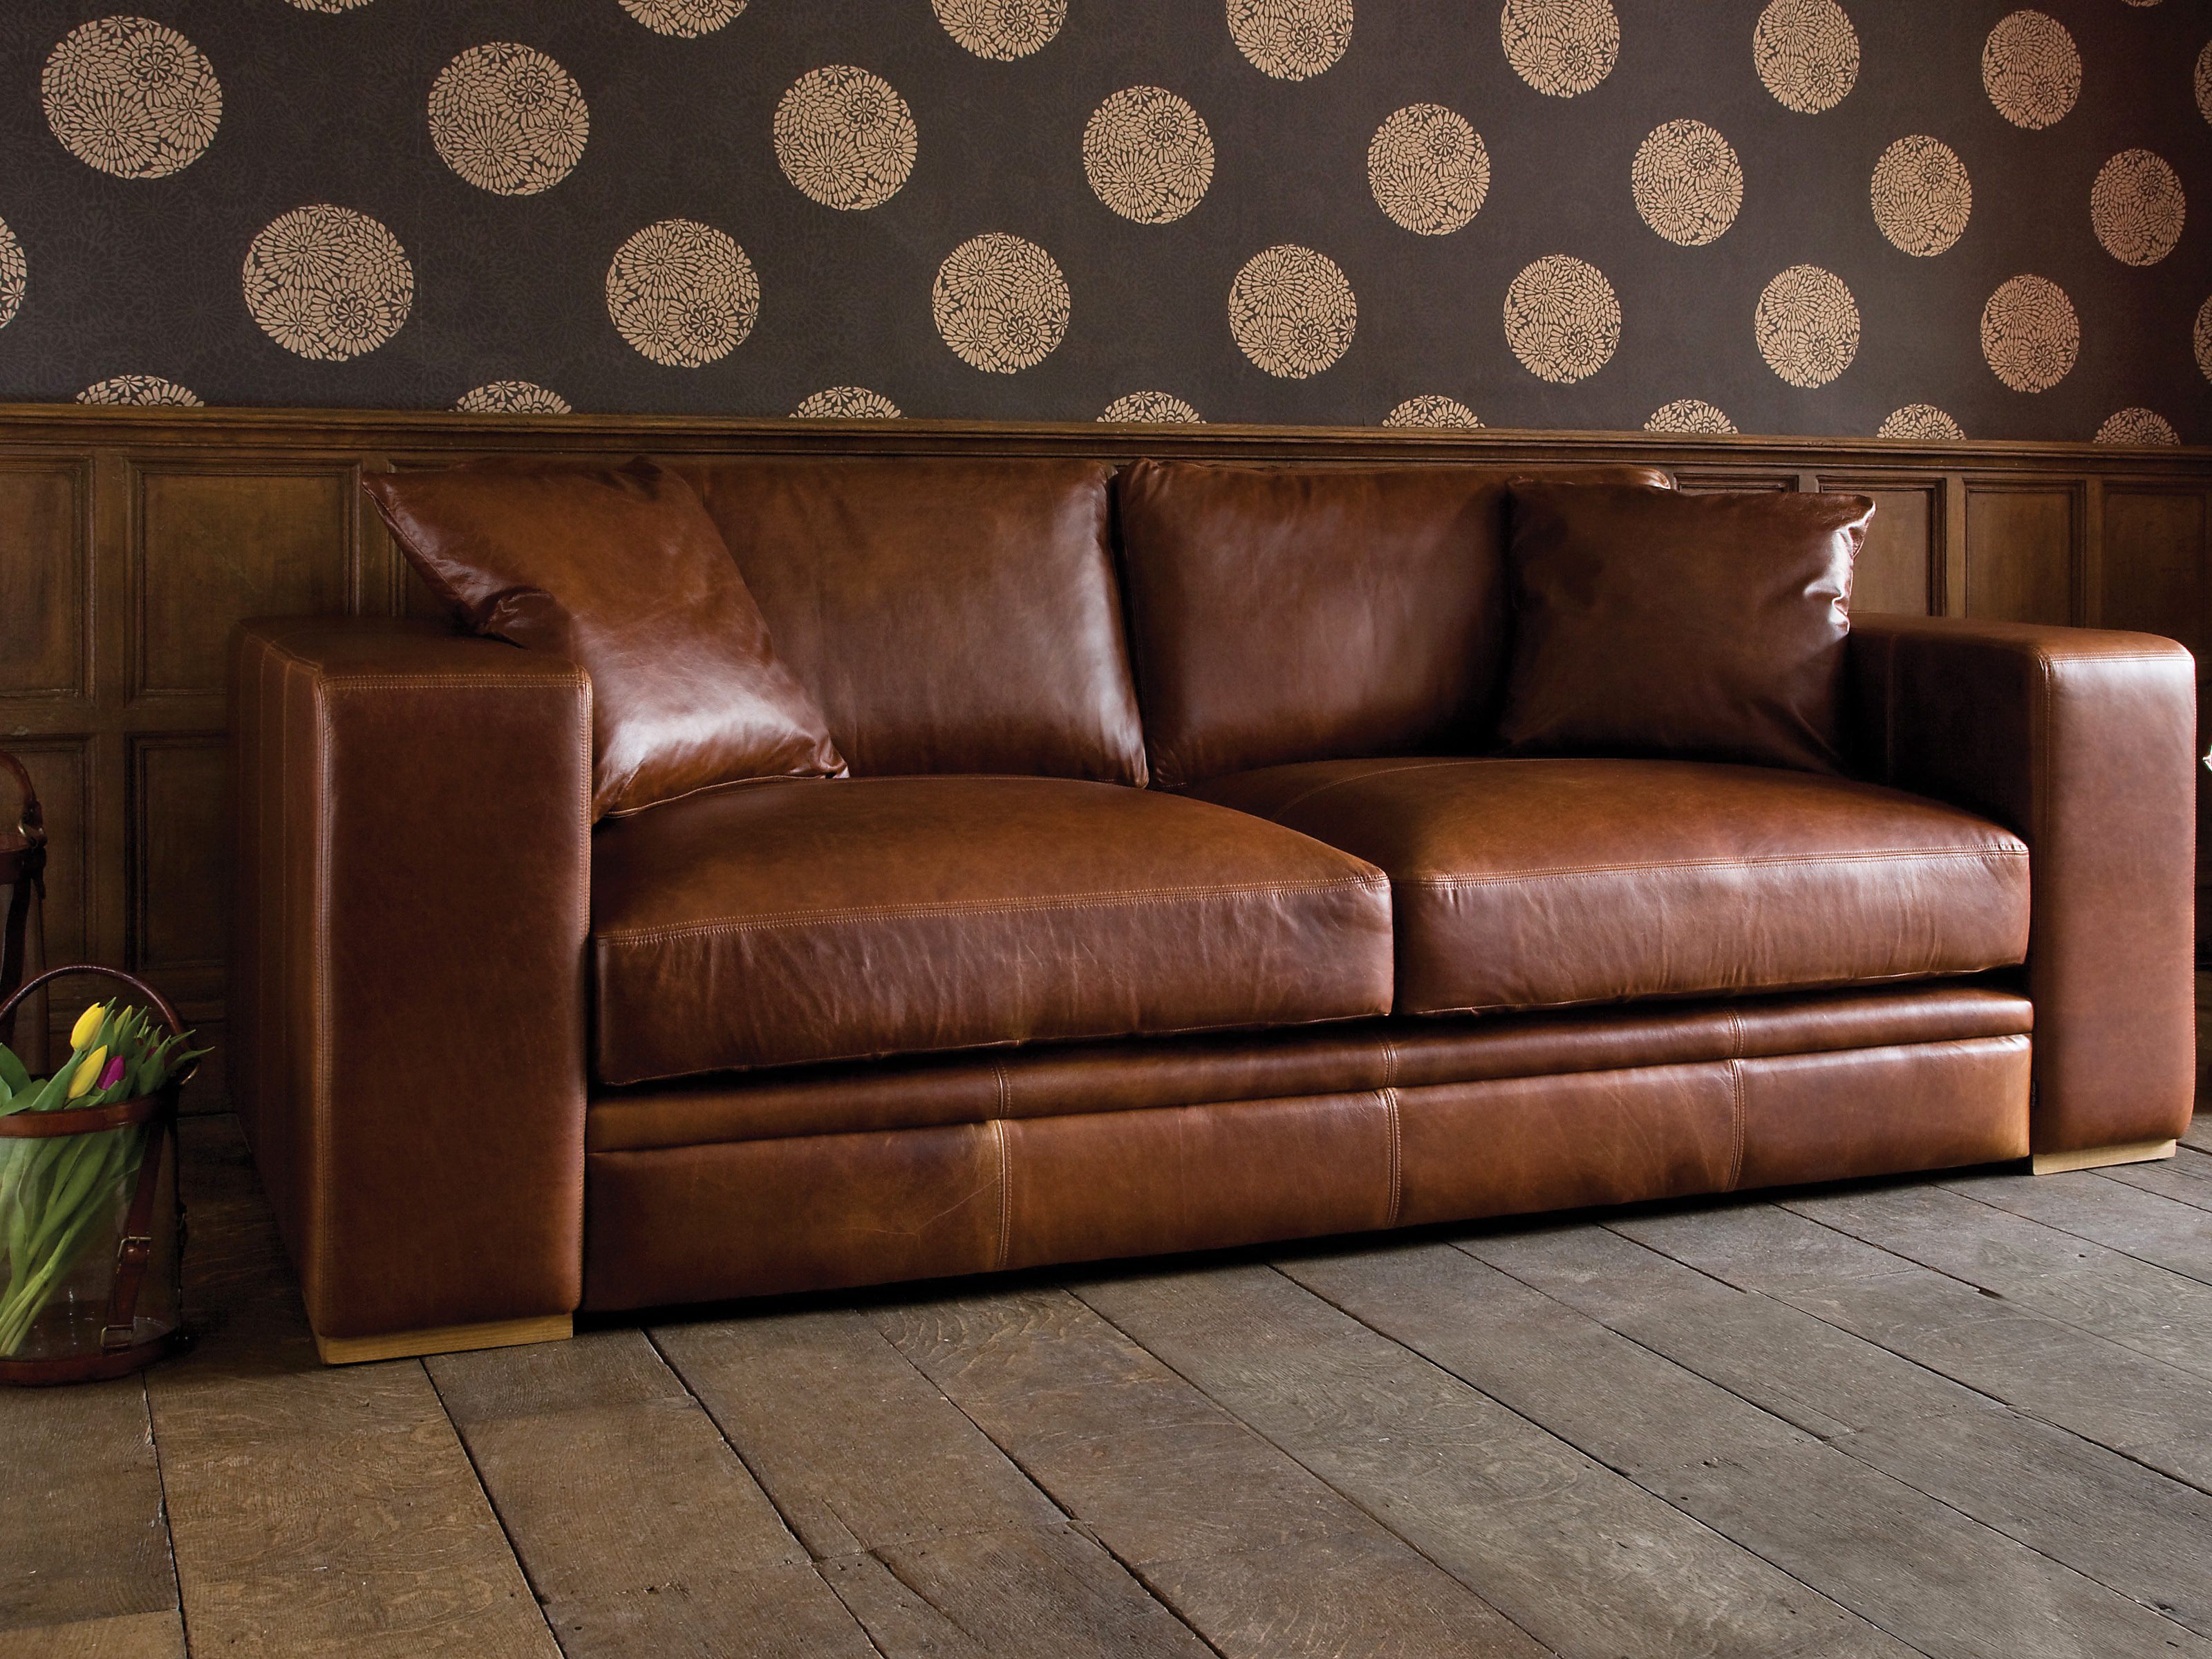 Artificial Leather for furnishing